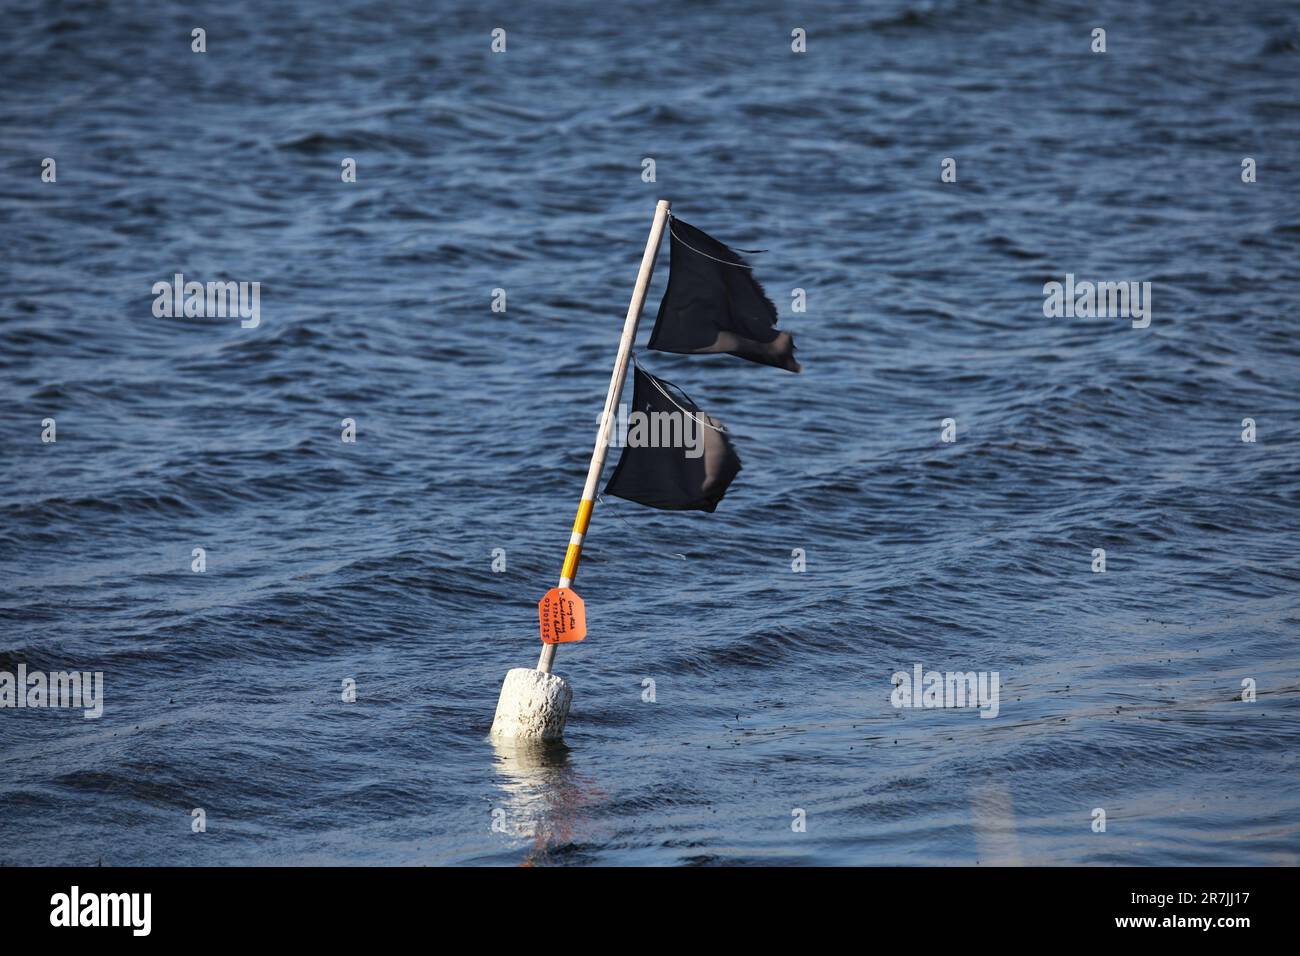 A buoy with two torn black flags floating in the calm waters of a lake or  river Stock Photo - Alamy